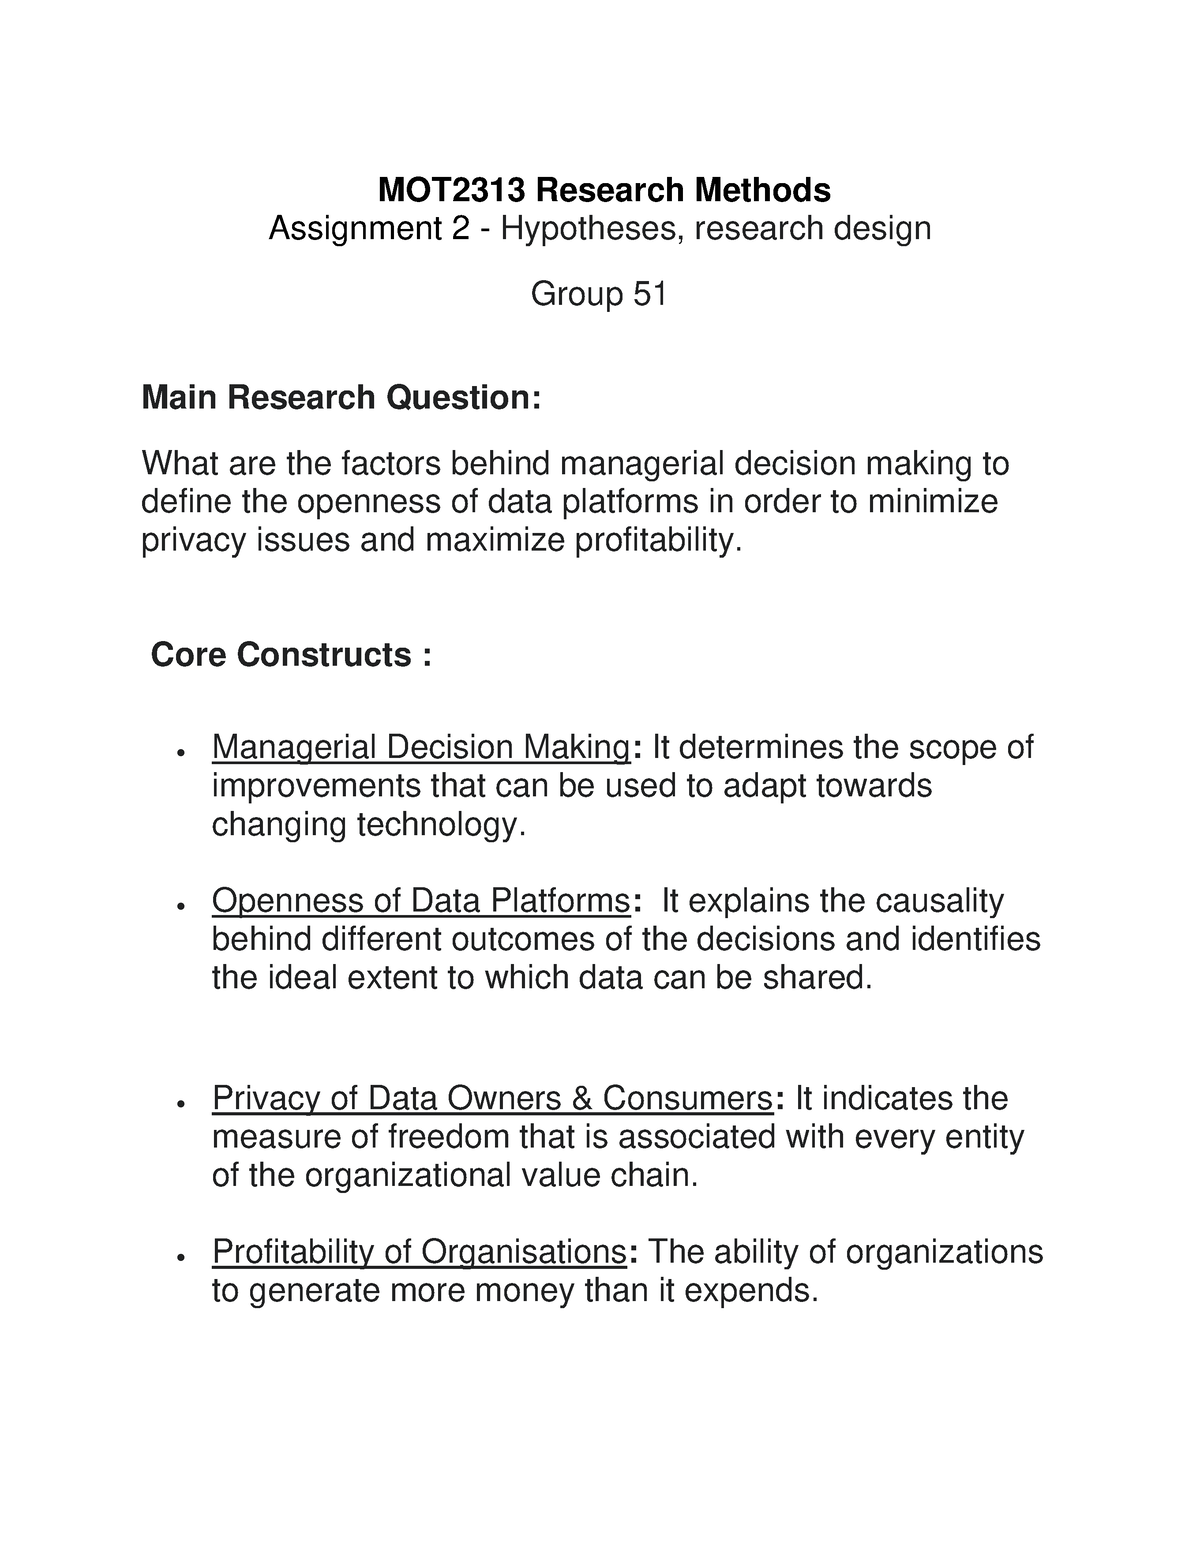 marketing research methods assignment 2